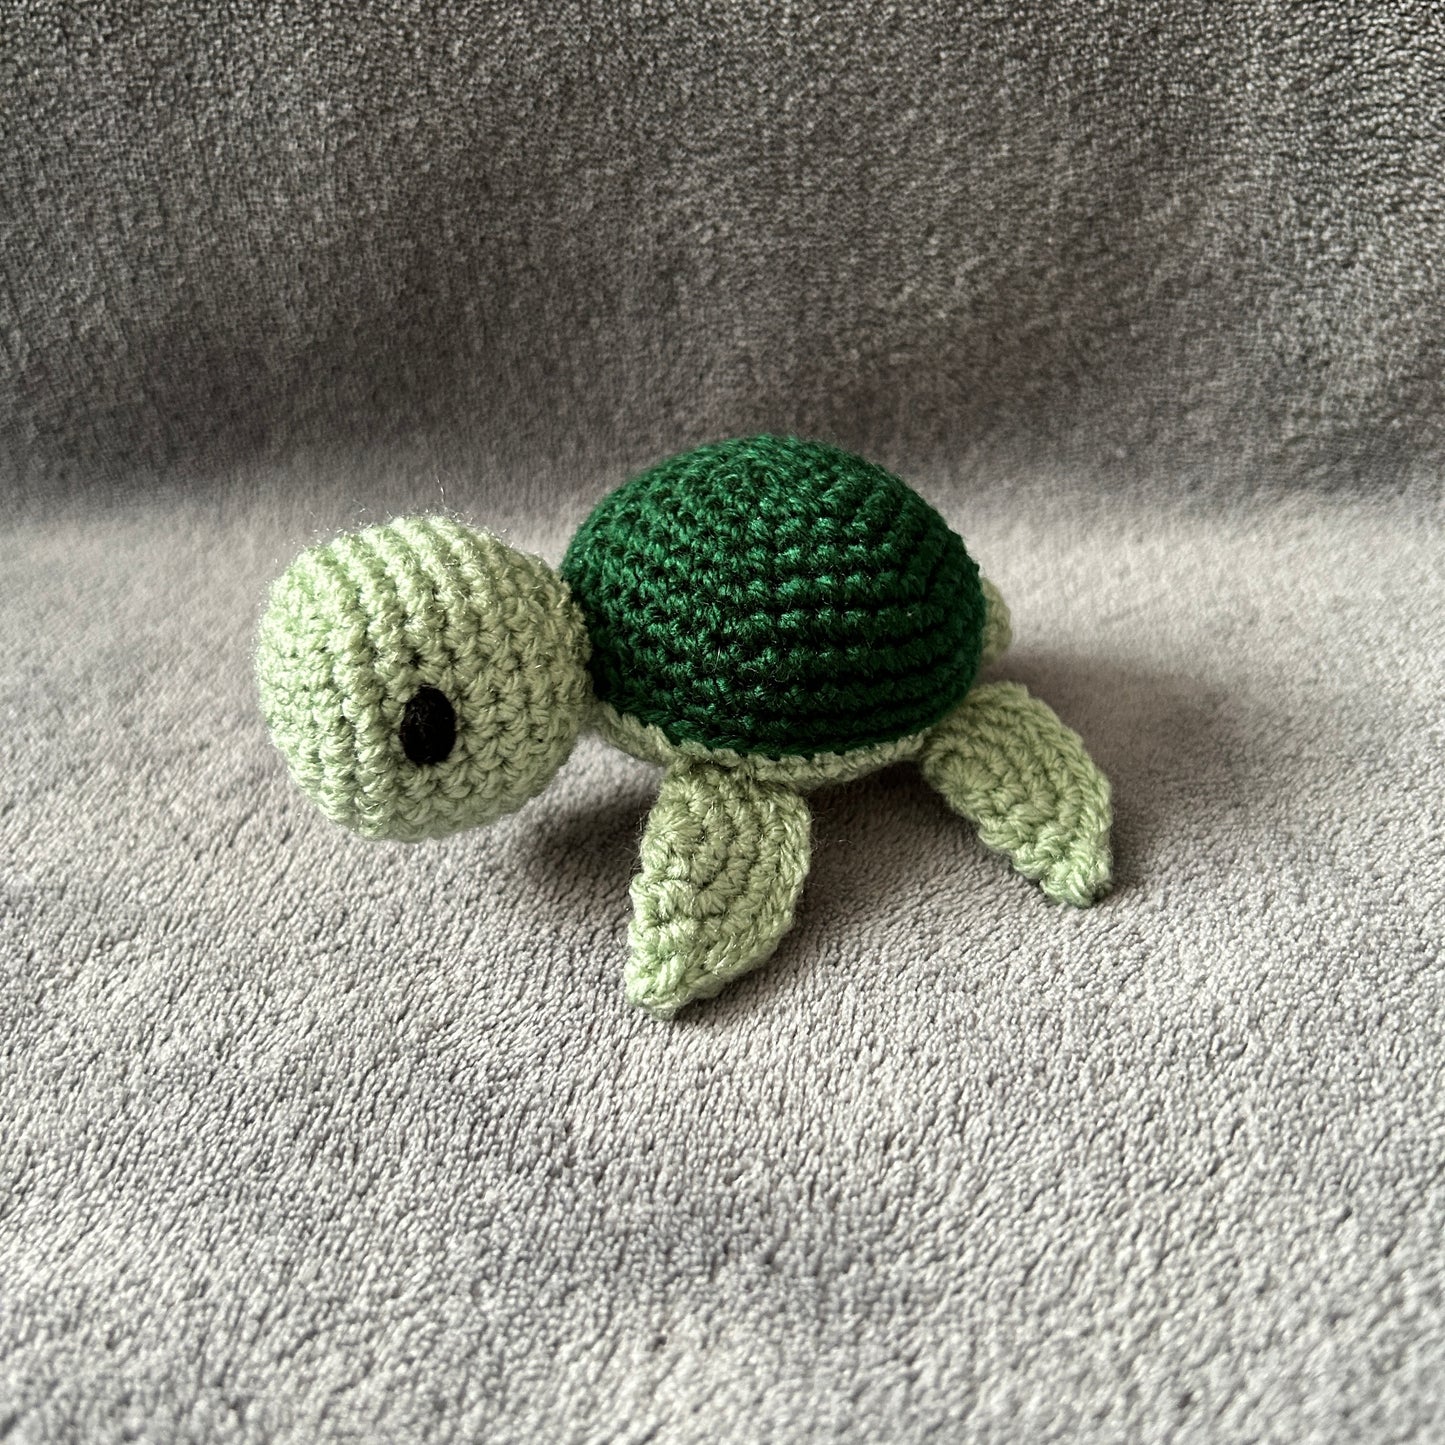 Taylor the Terrapin Toy